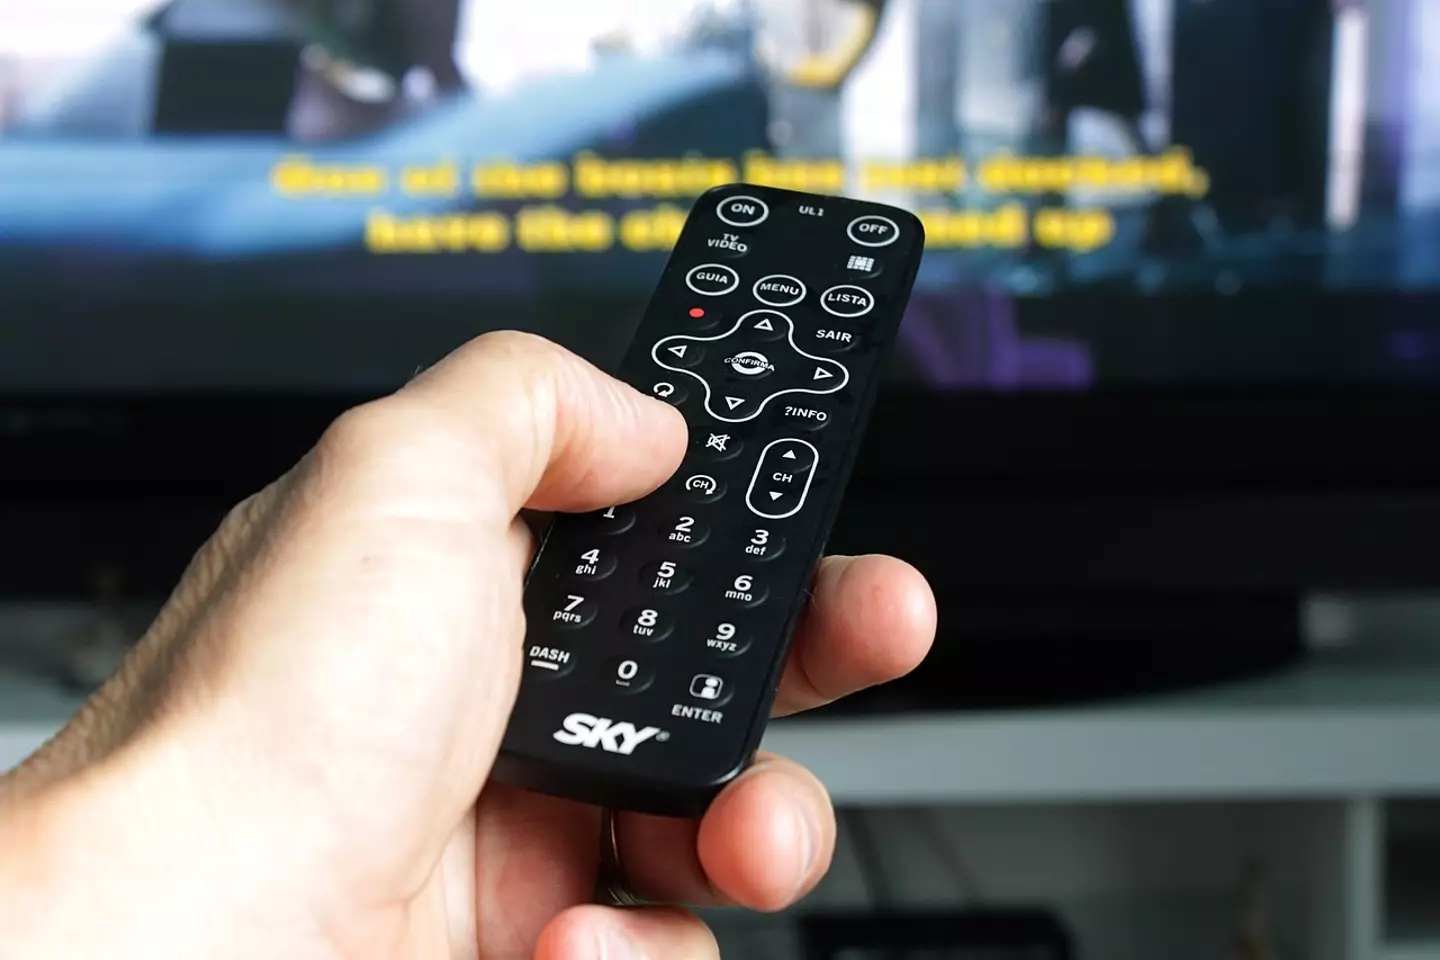 Thanks to remote controls, movie scenes can now be paused by the second.